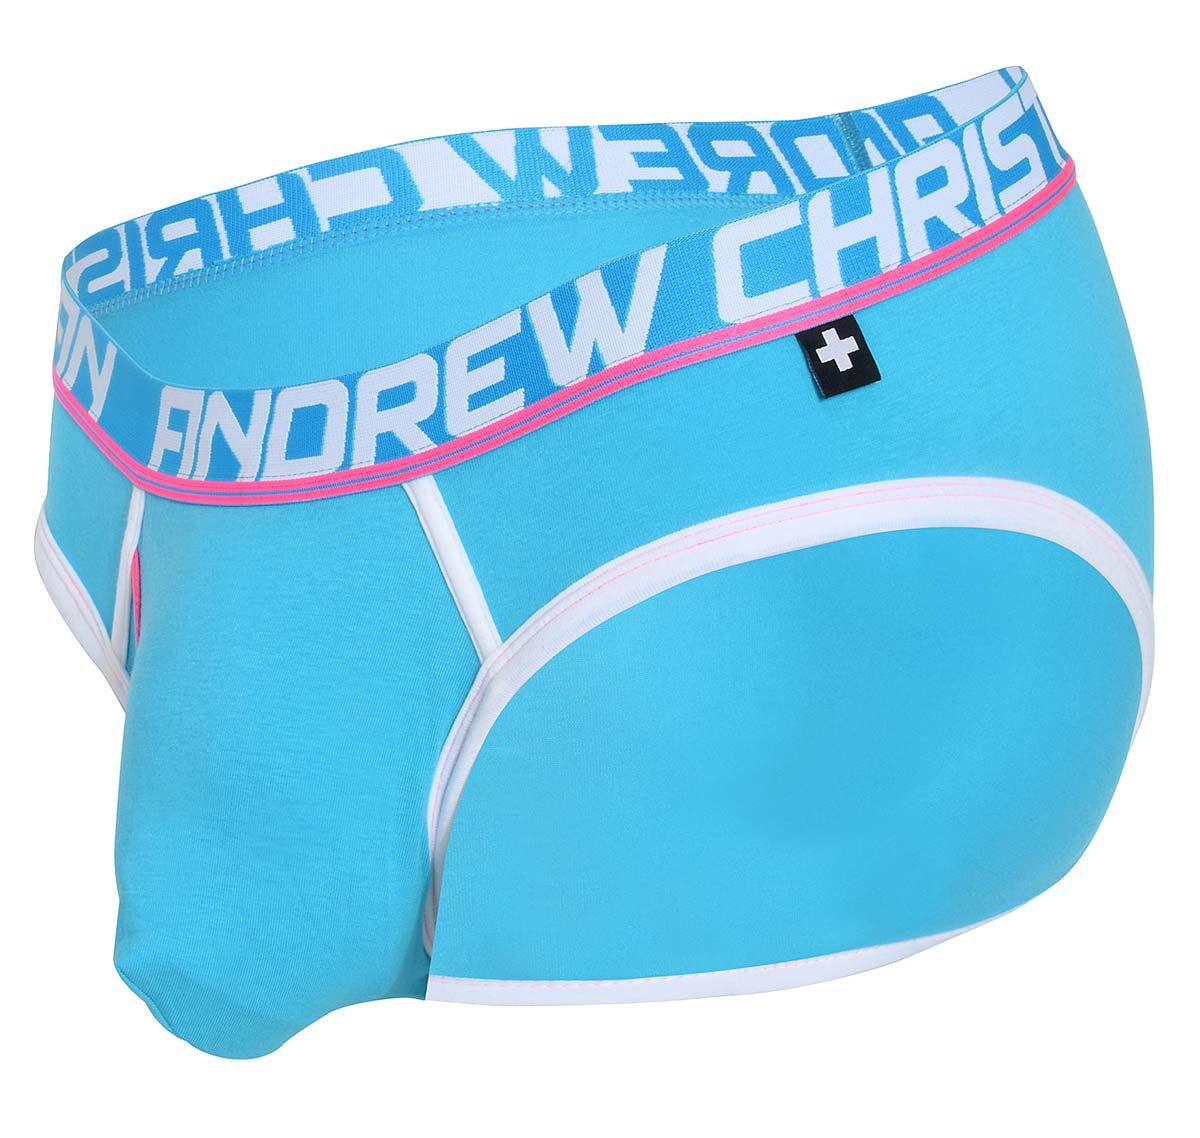 Andrew Christian Slip FLY TAGLESS BRIEF w/ ALMOST NAKED 92049, blu